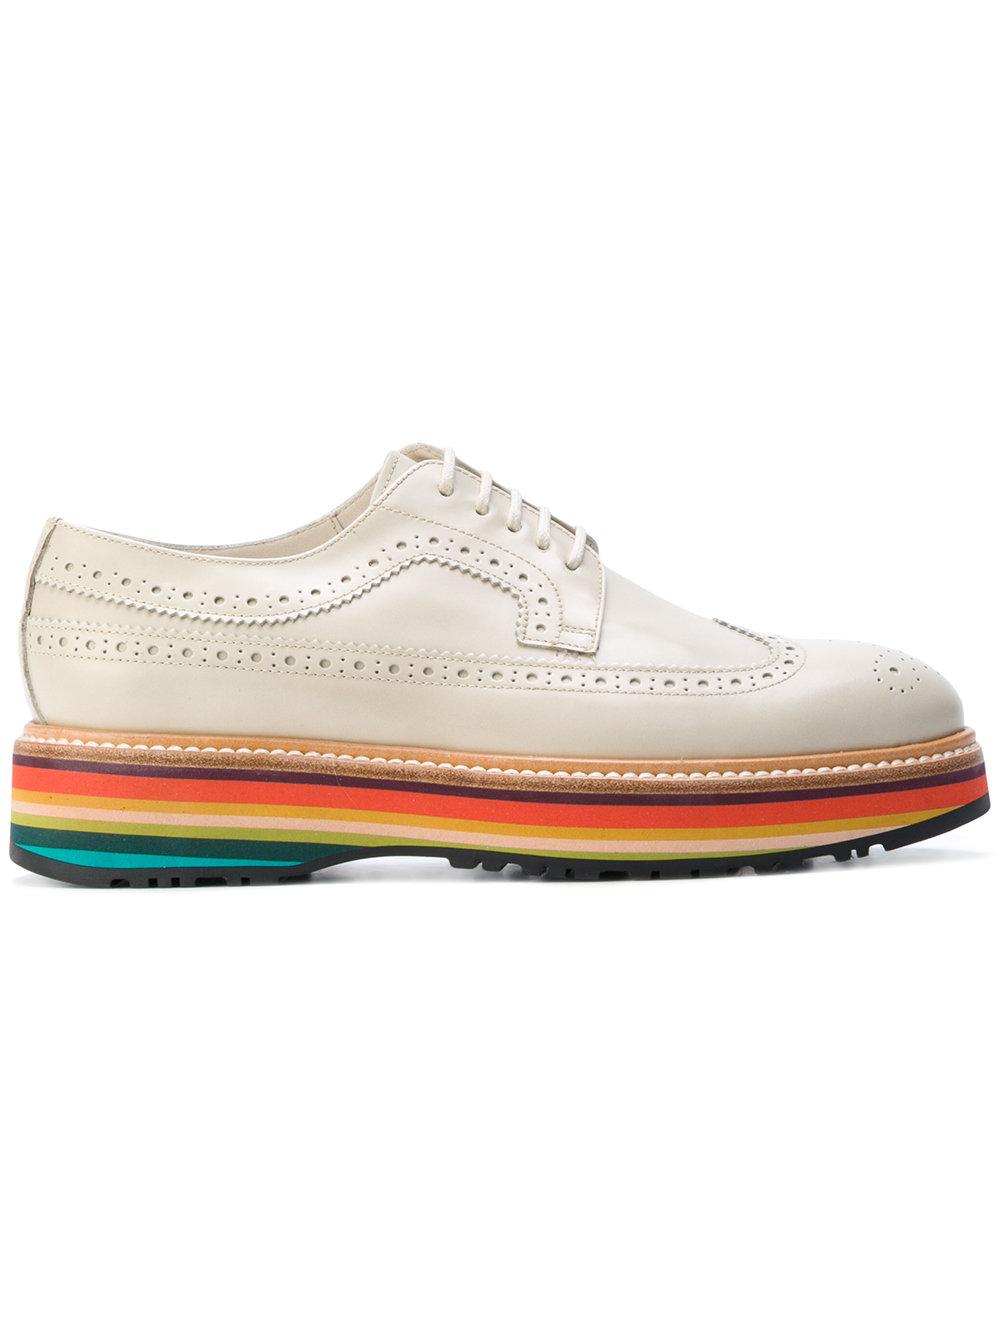 Lyst - Paul smith Platform Brogues in White for Men - Save 50%